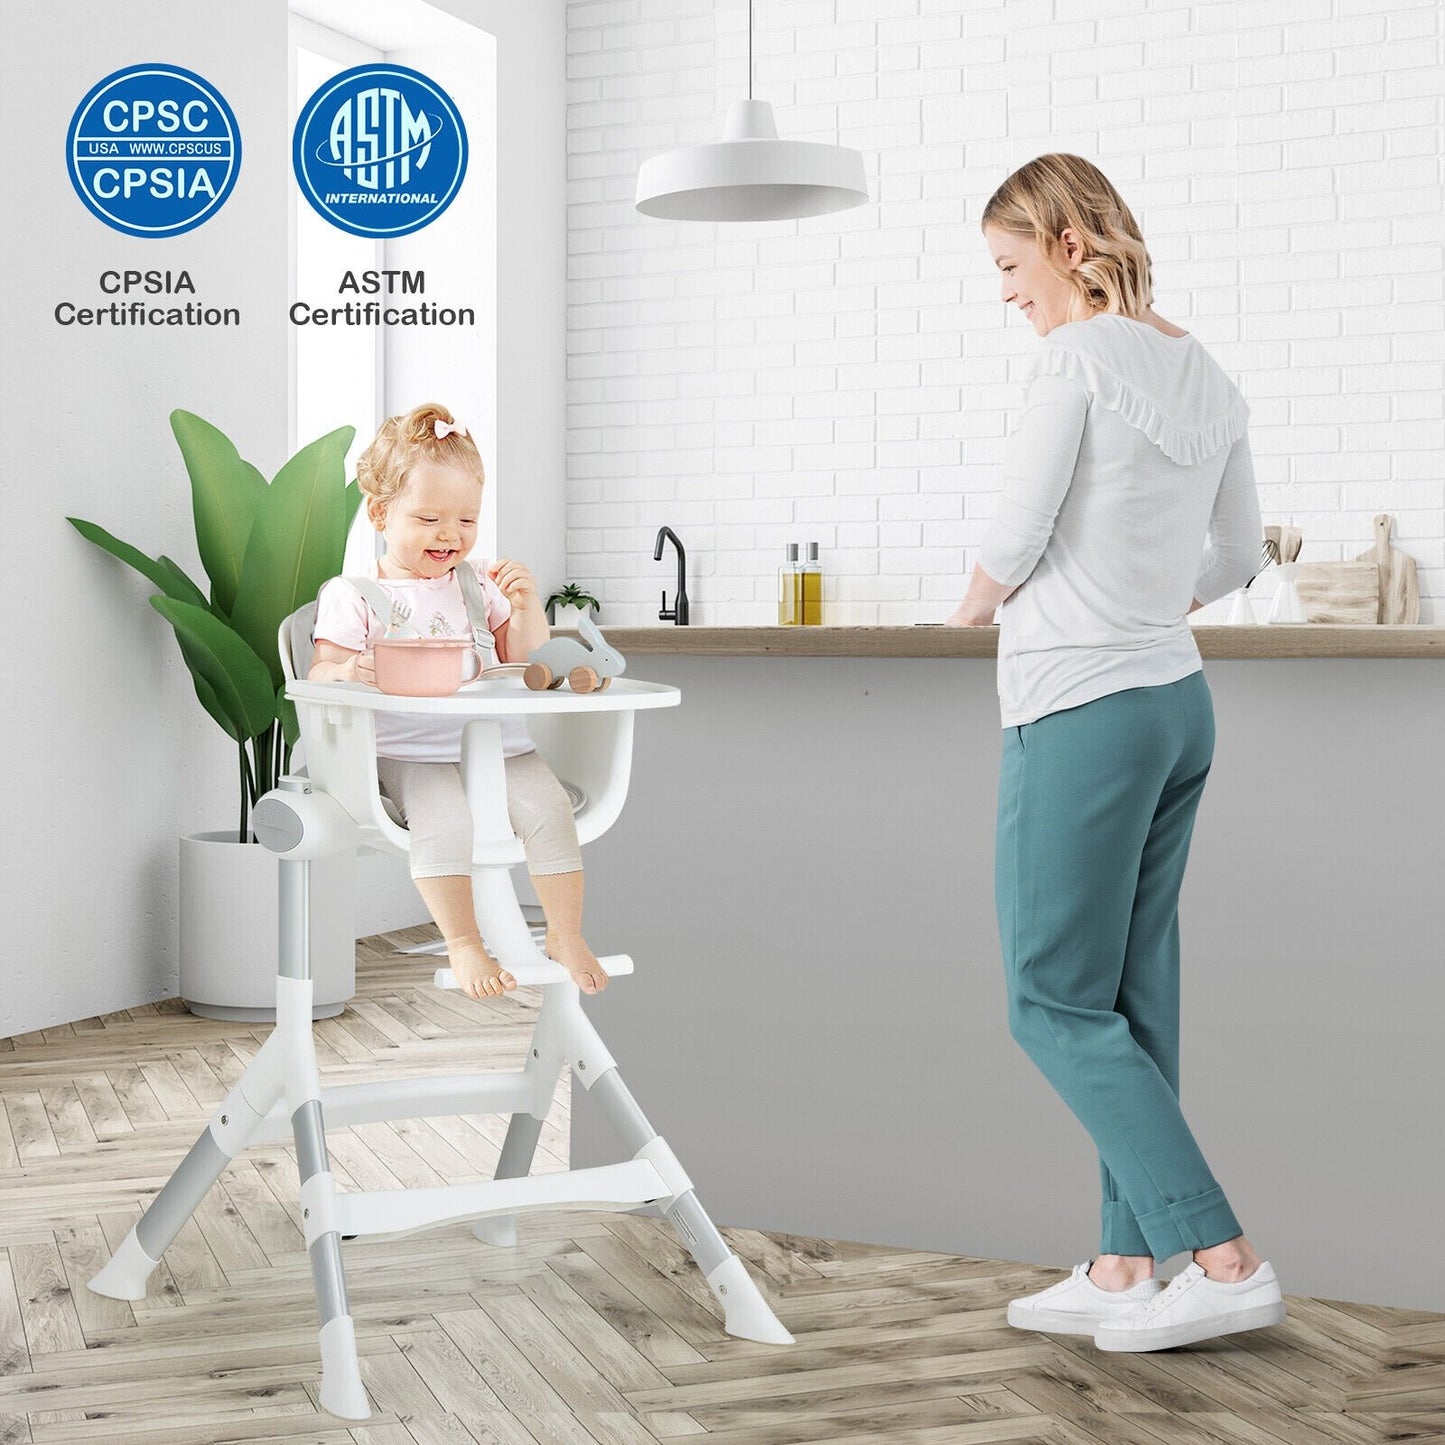 4-in-1 Convertible Baby High Chair with Aluminum Frame, Gray at Gallery Canada